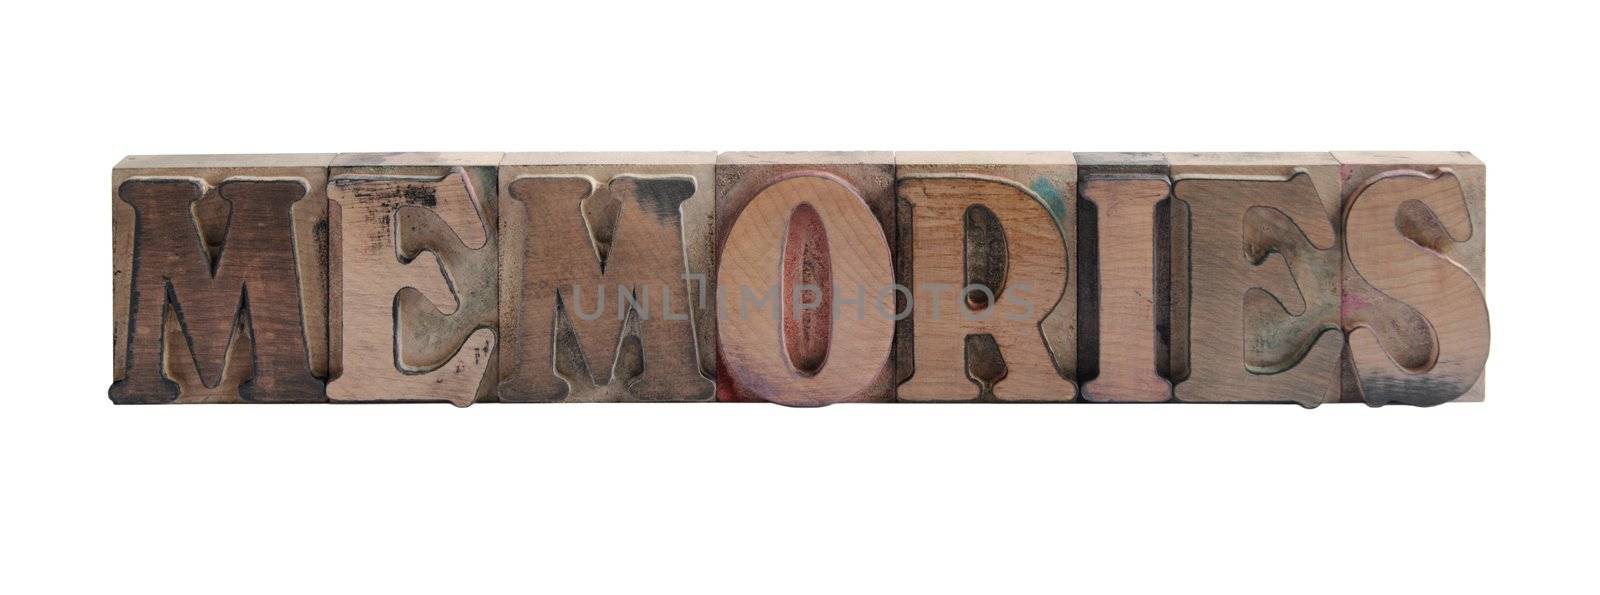 the word 'memories' in old, ink-stained wood type